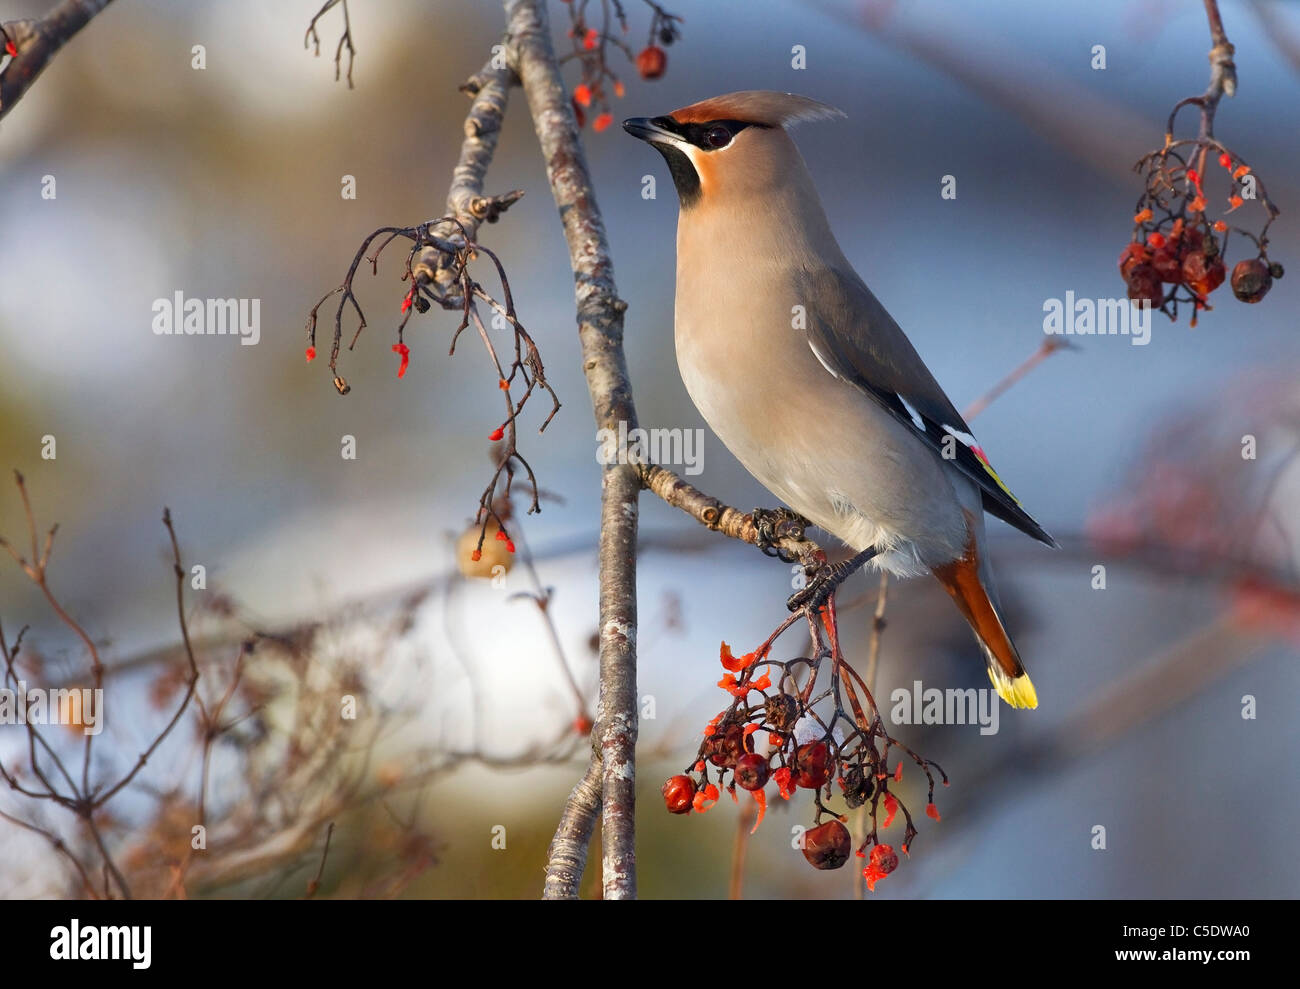 Close-up side shot of Waxwing on branch with berries against blurred background Stock Photo